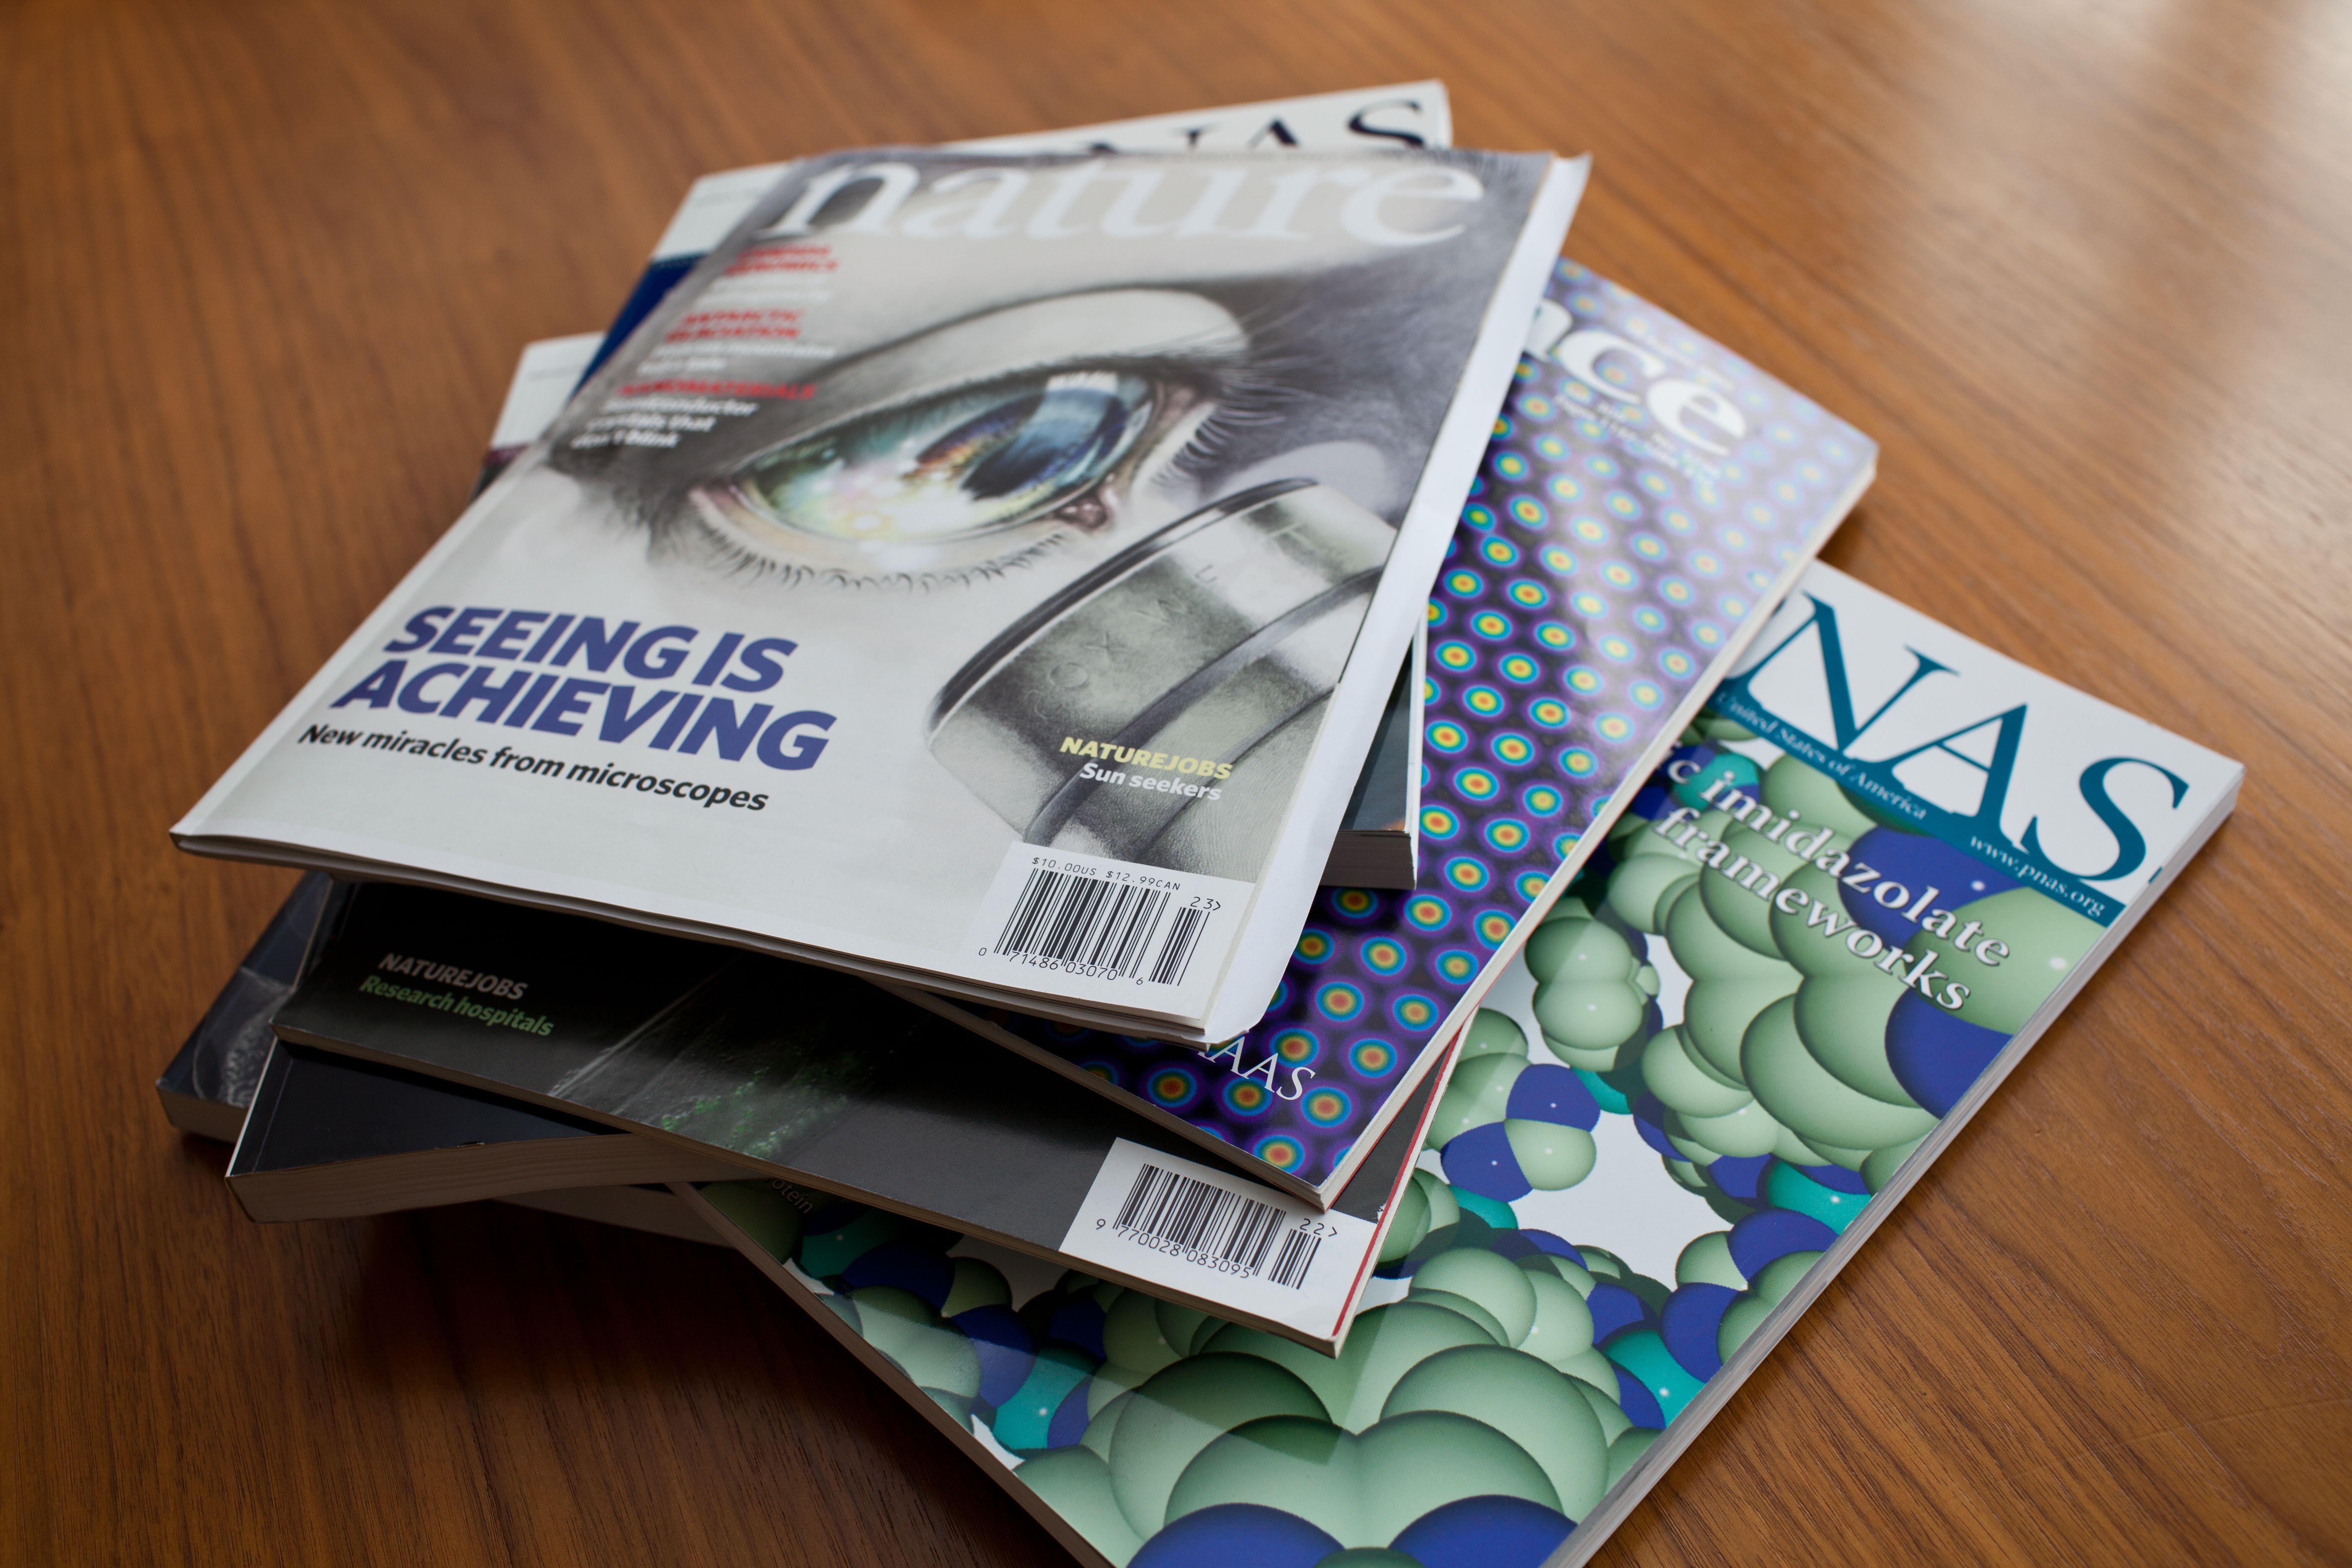 Pile of science magazines